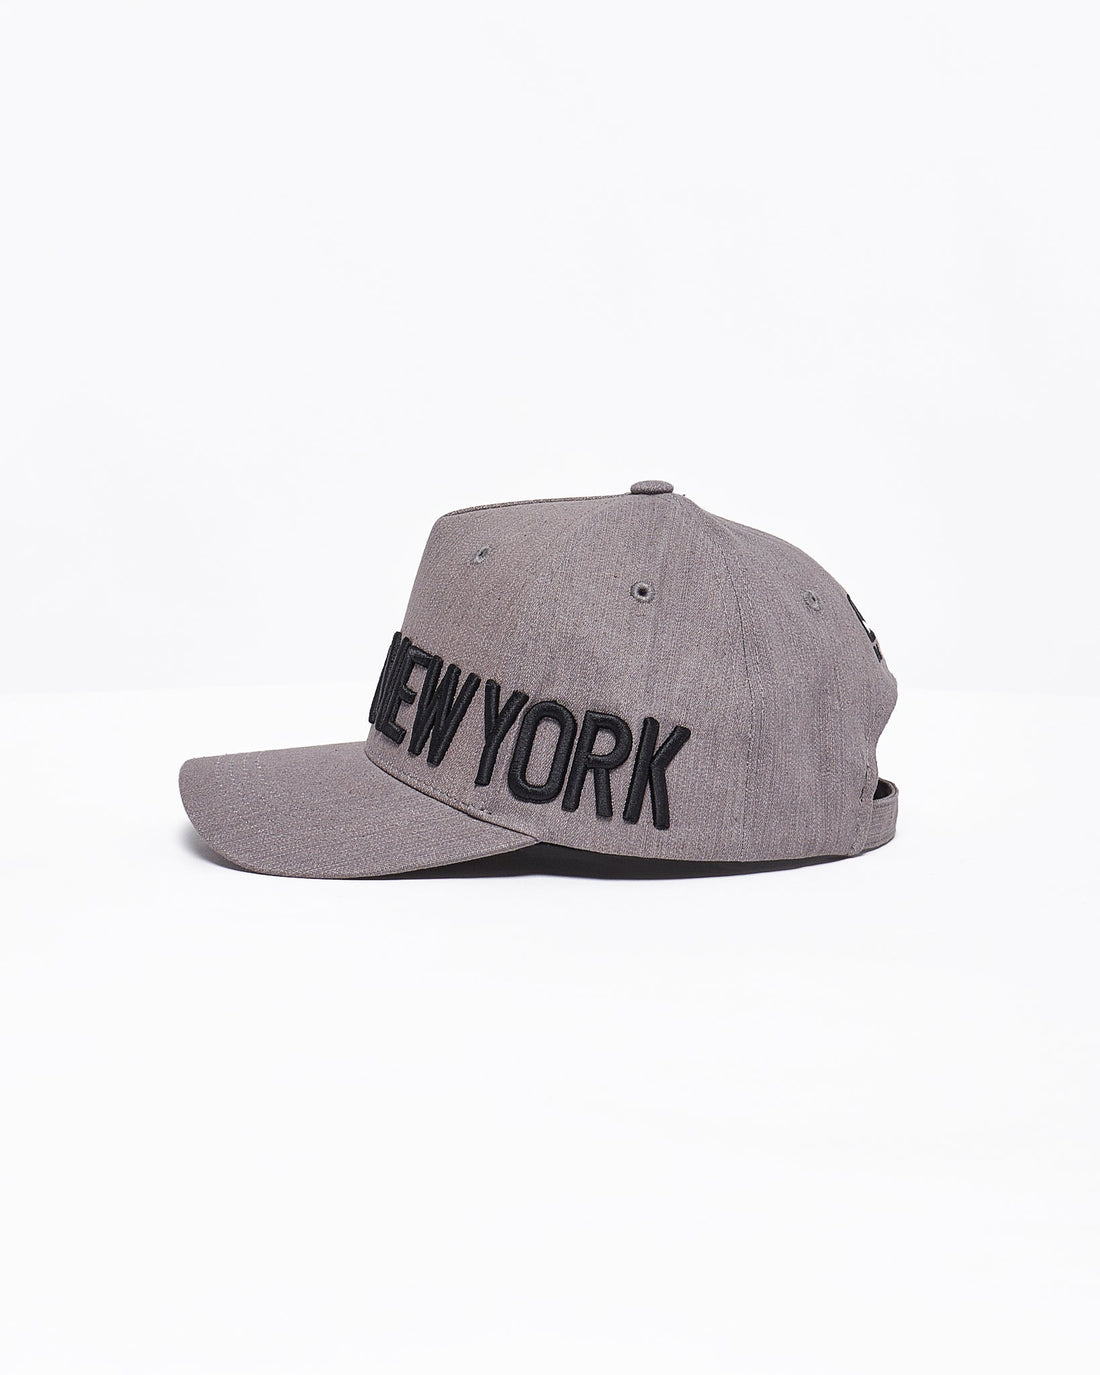 MOI OUTFIT-New York Embroidered Cap 10.90